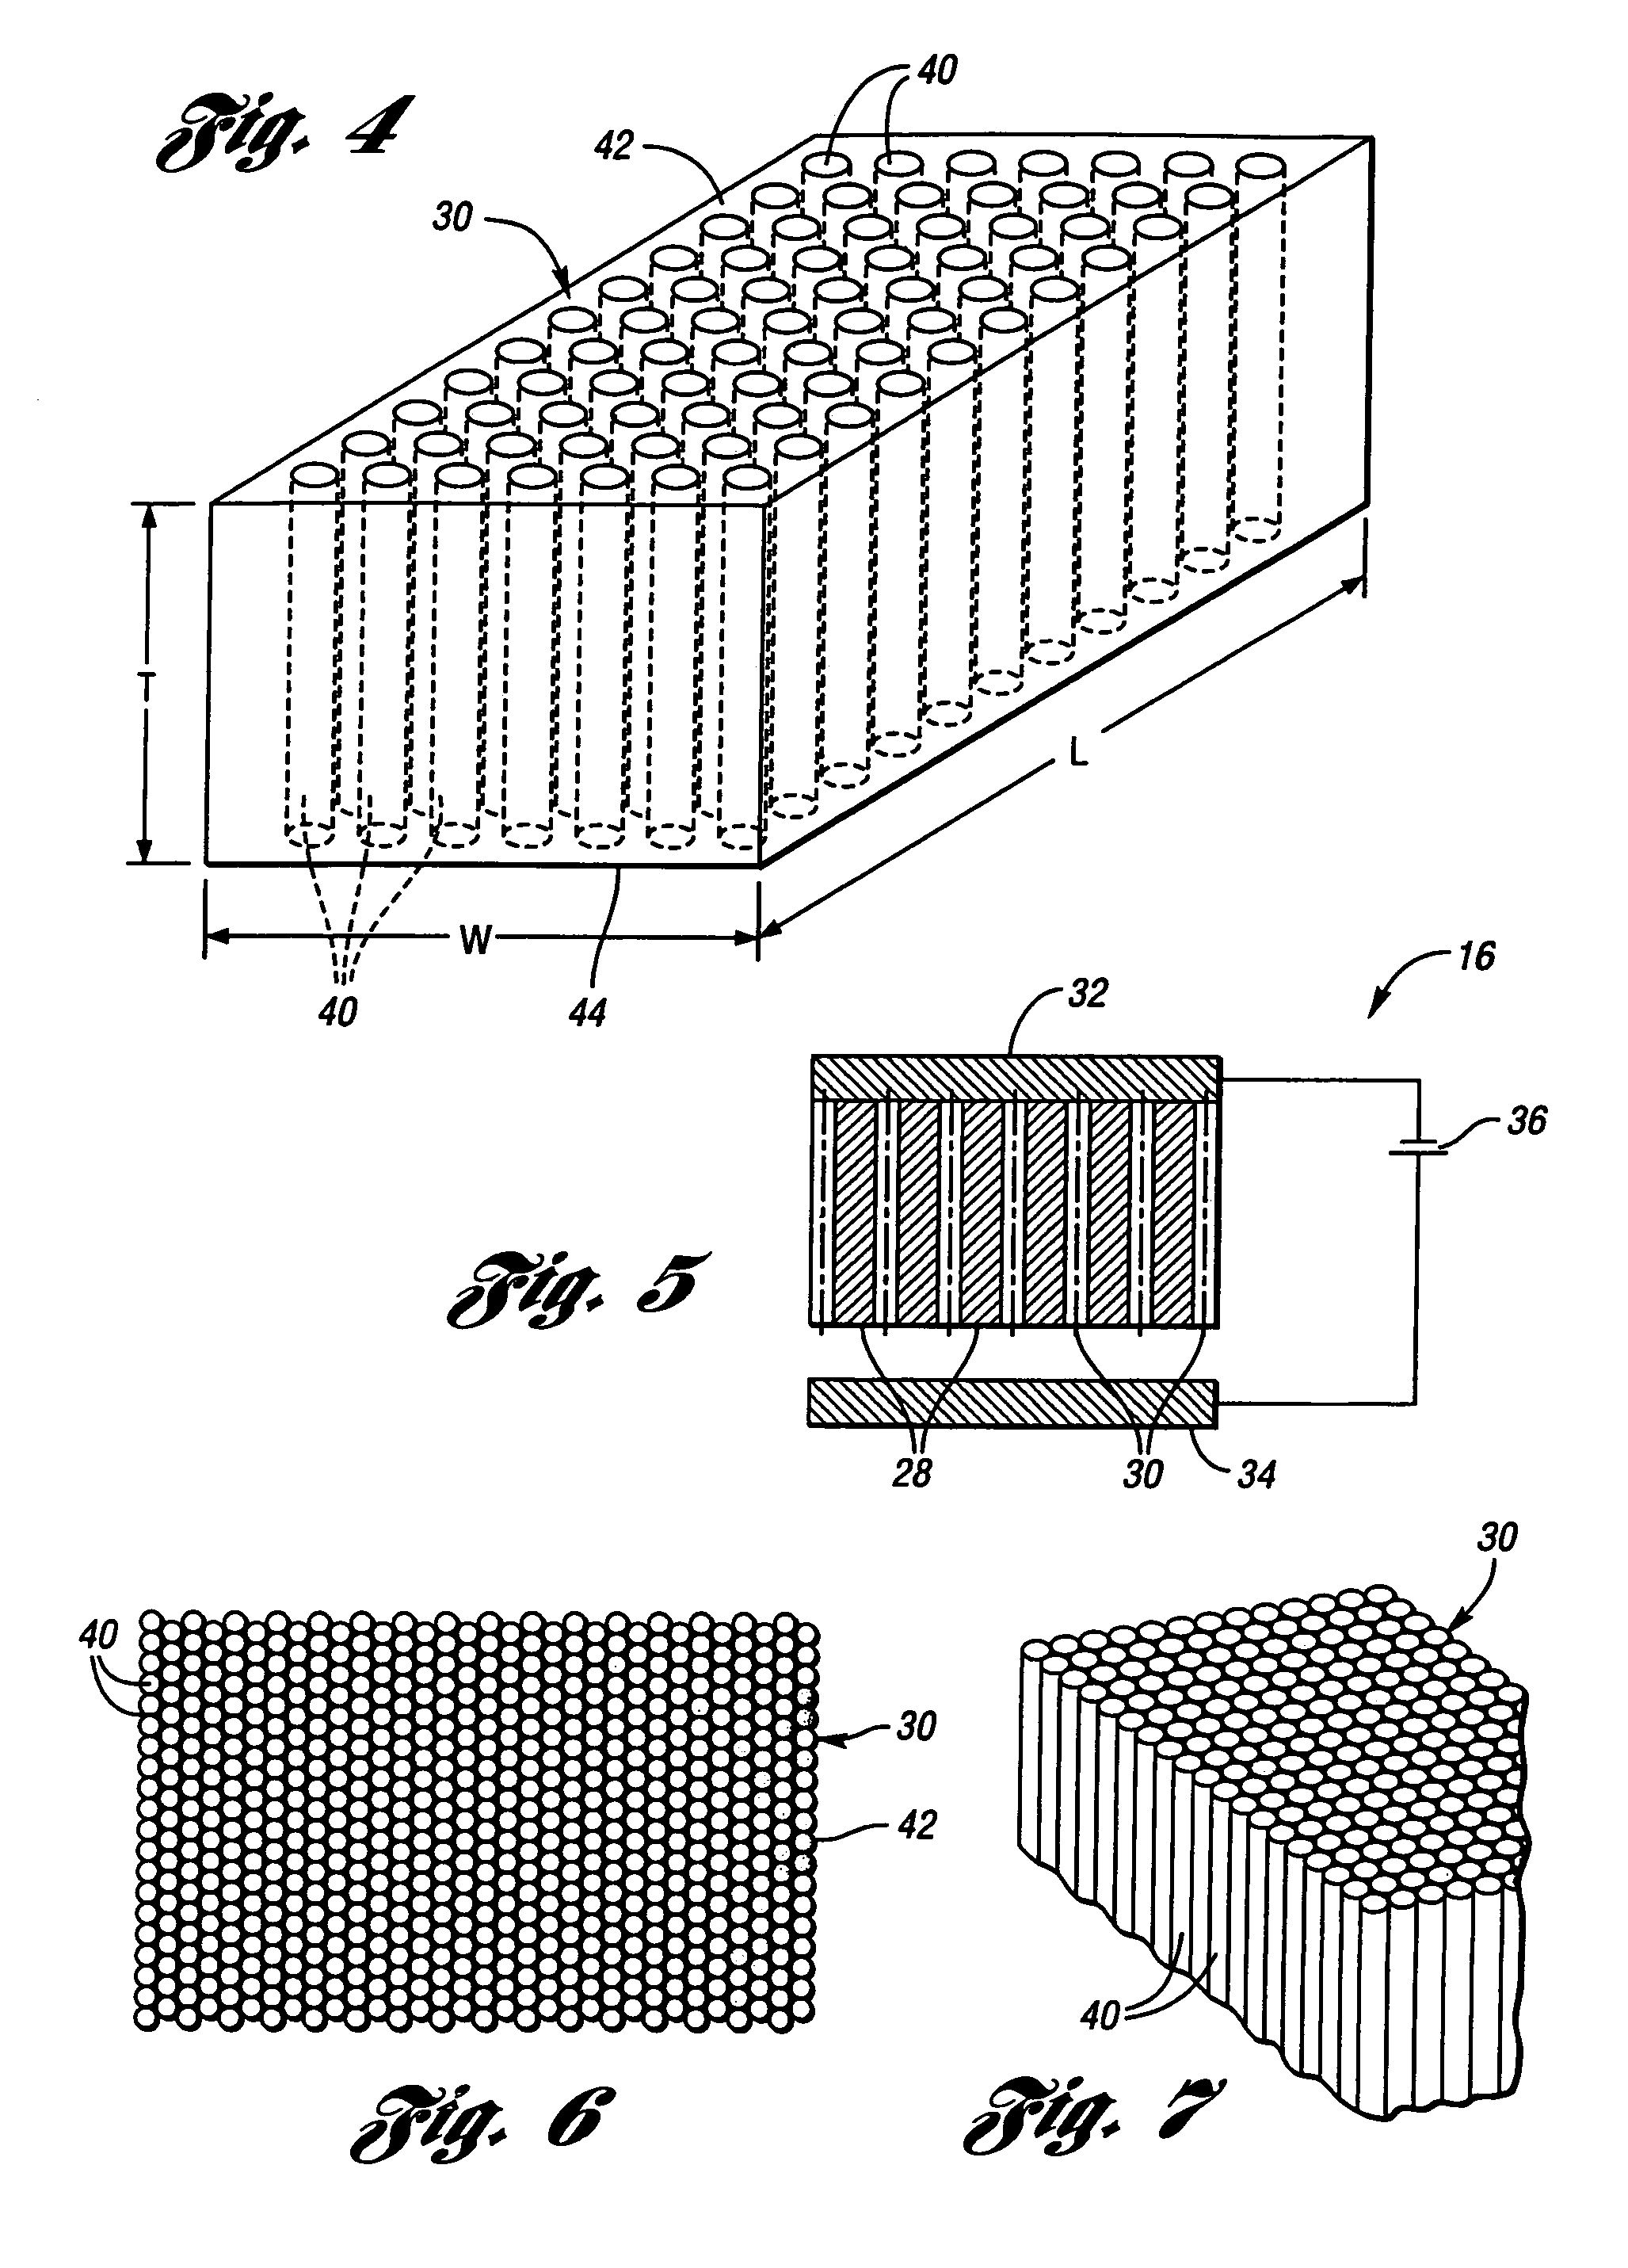 Magnetic recorder having carbon nanotubes embedded in anodic alumina for emitting electron beams to perform heat-assisted magnetic recording